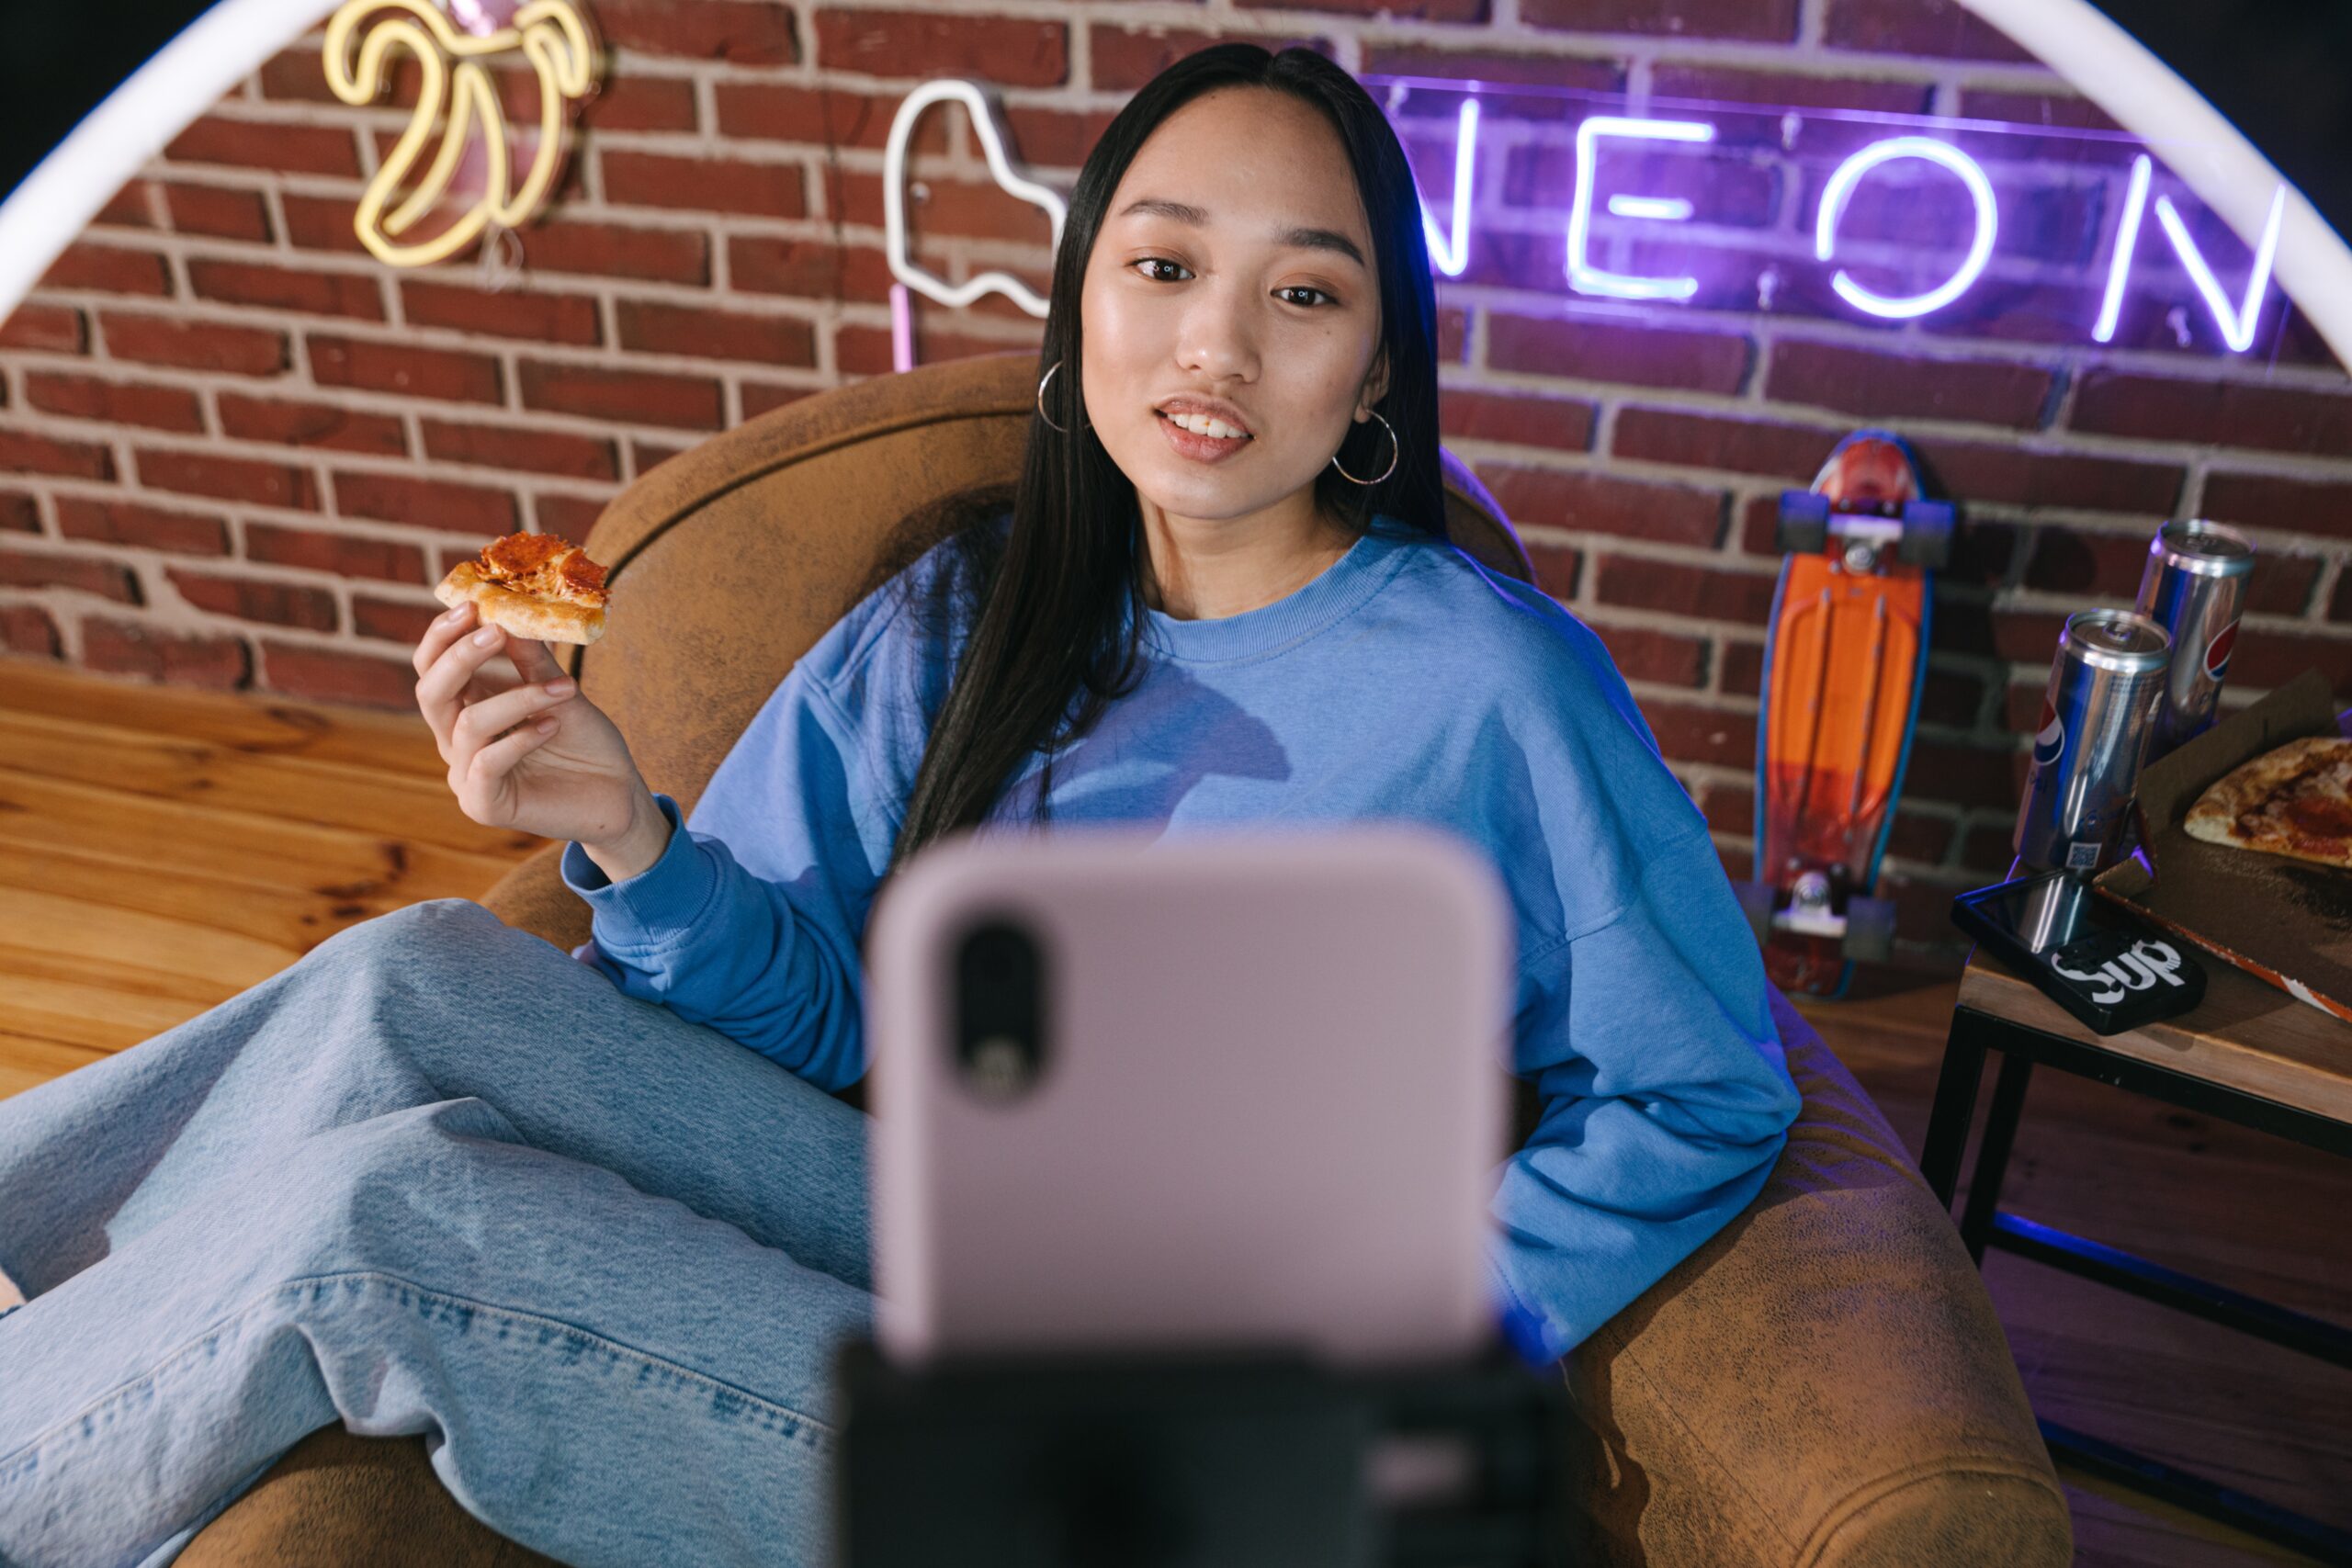 In an article about content creators woman in front of her cell phone recording herself